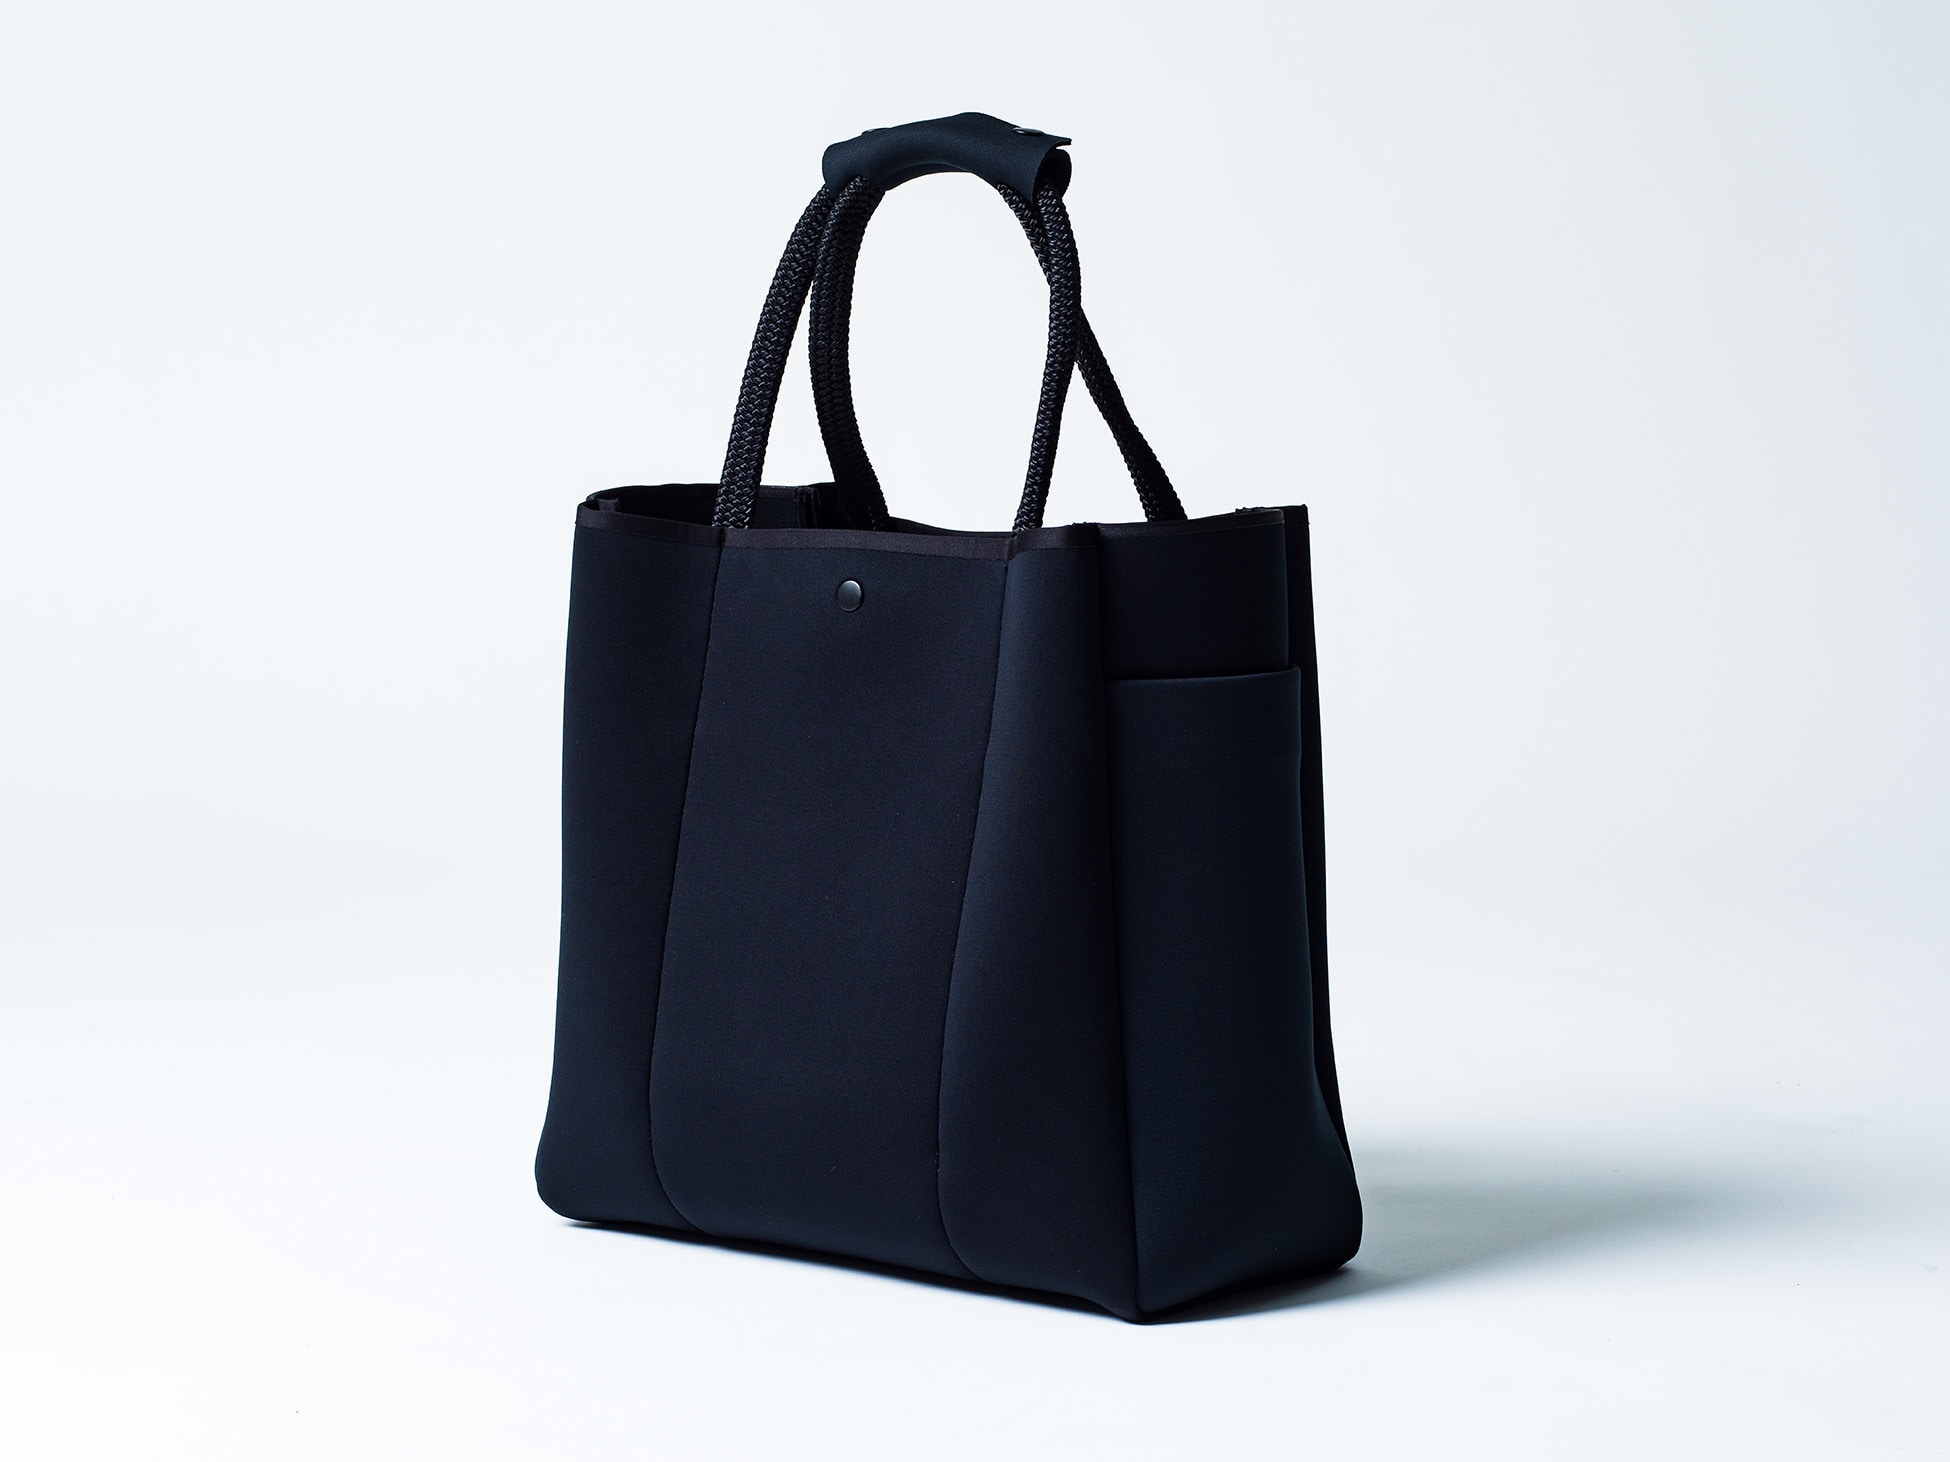 STATE OF ESCAPE for Ron Herman Tote Bag 5.28(Sat) New Arrival News 